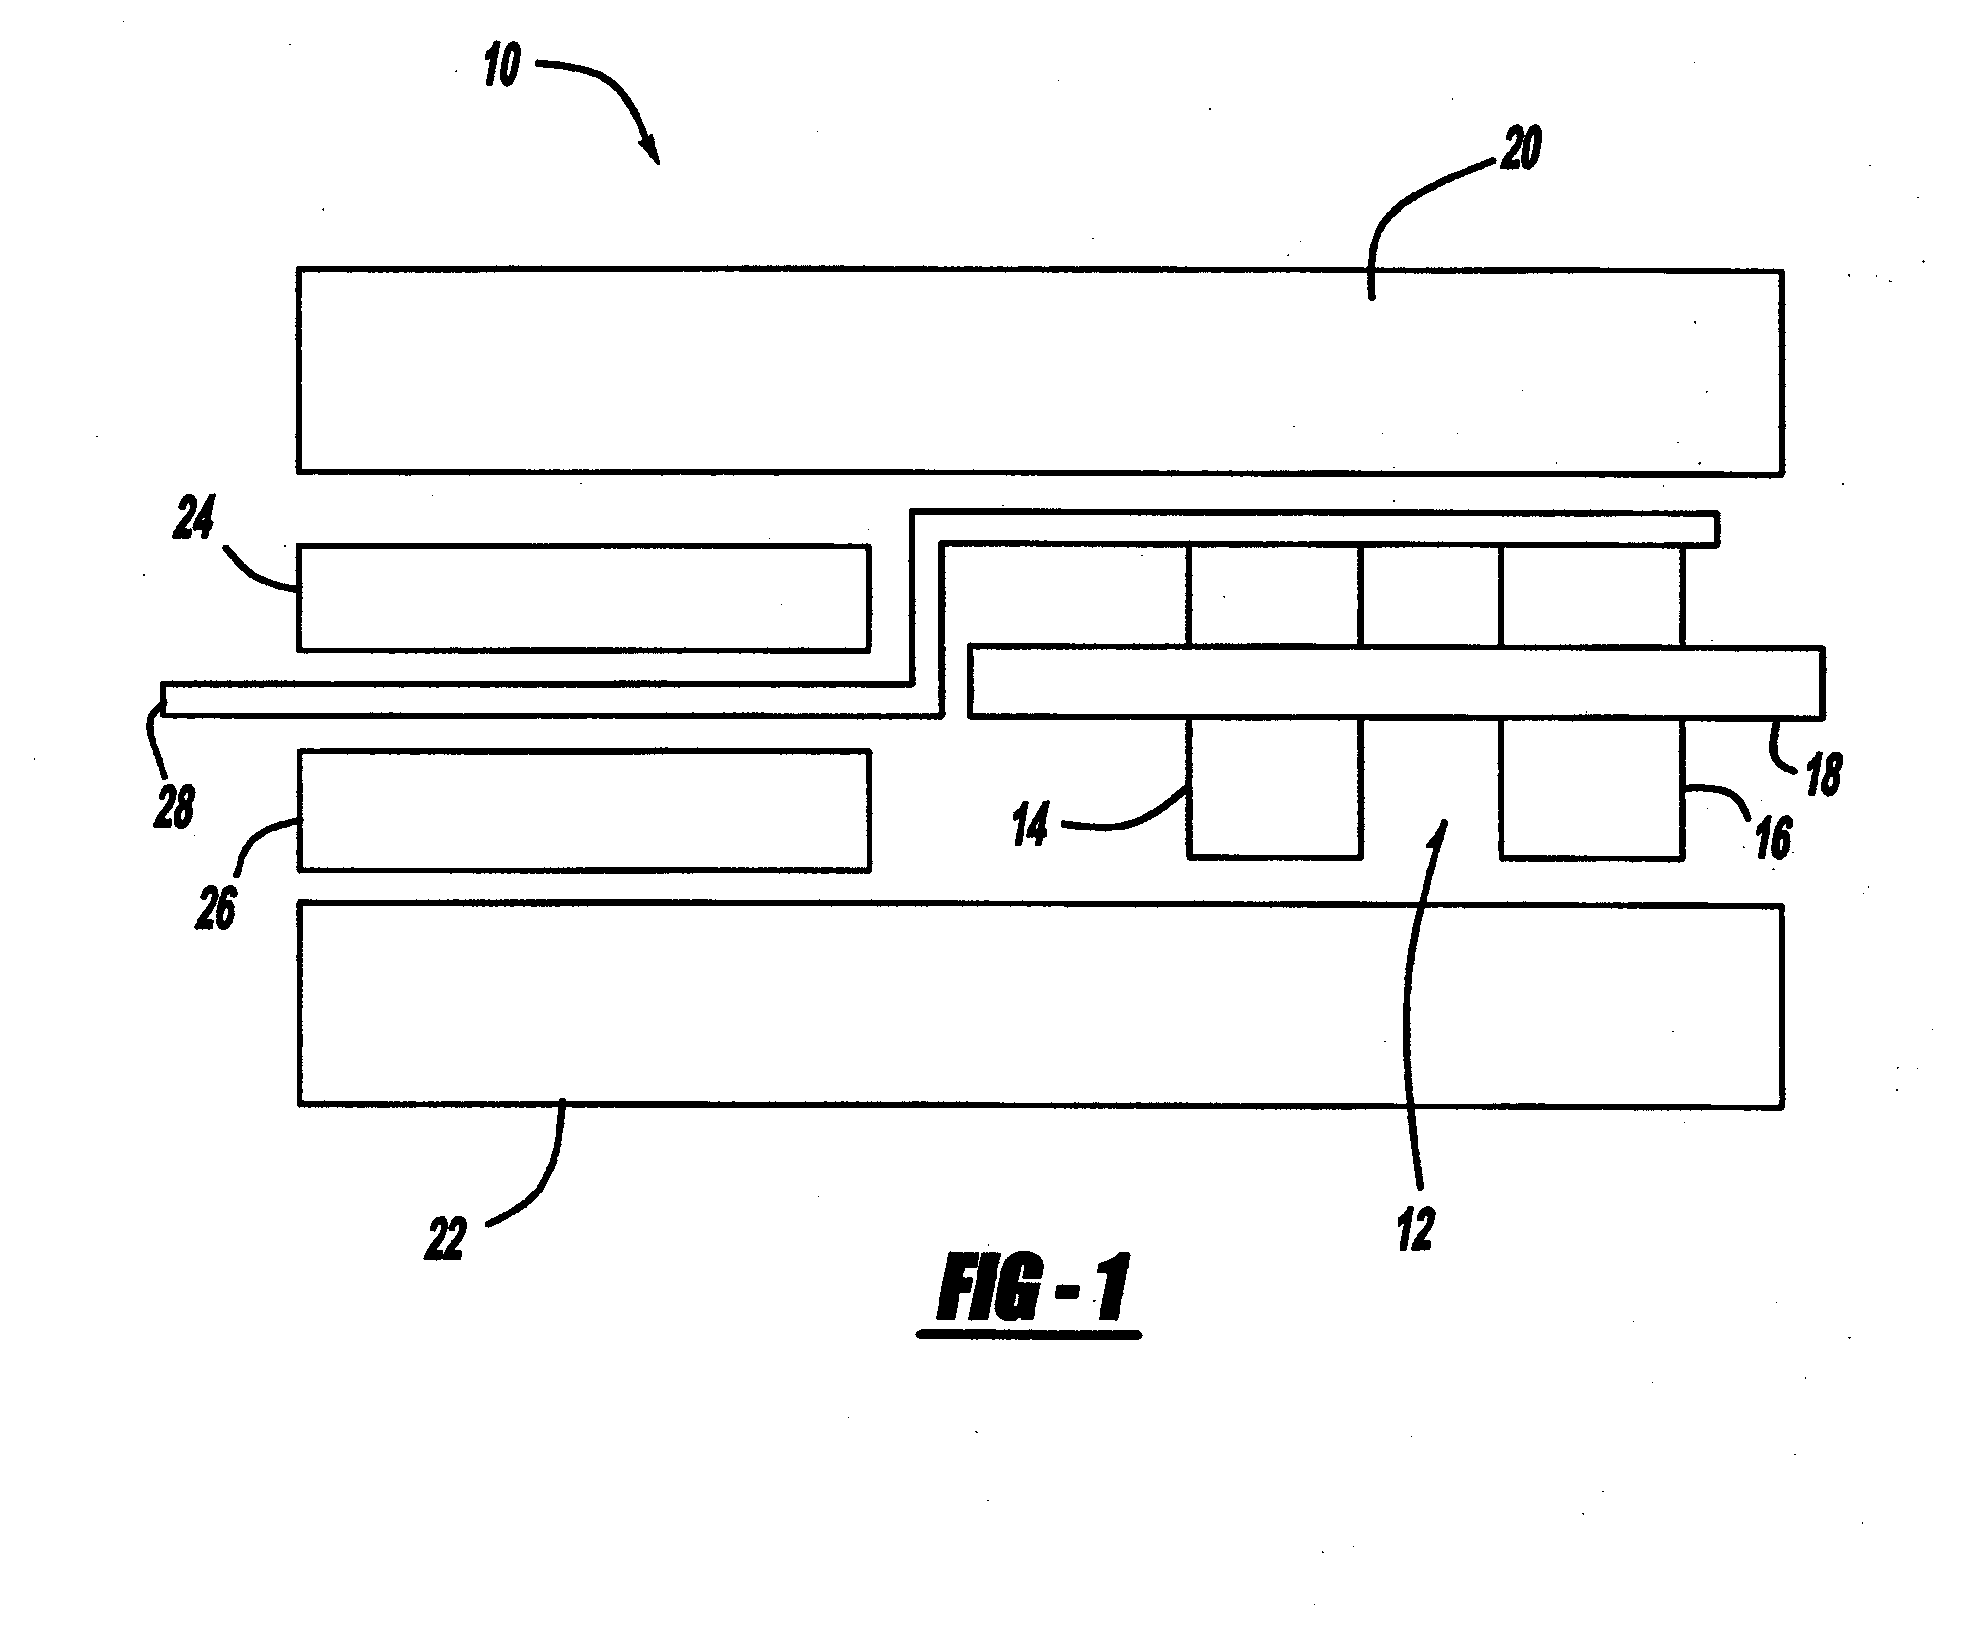 Multi-Component Fuel Cell Gasket For Low Temperature Sealing And Minimal Membrane Contamination